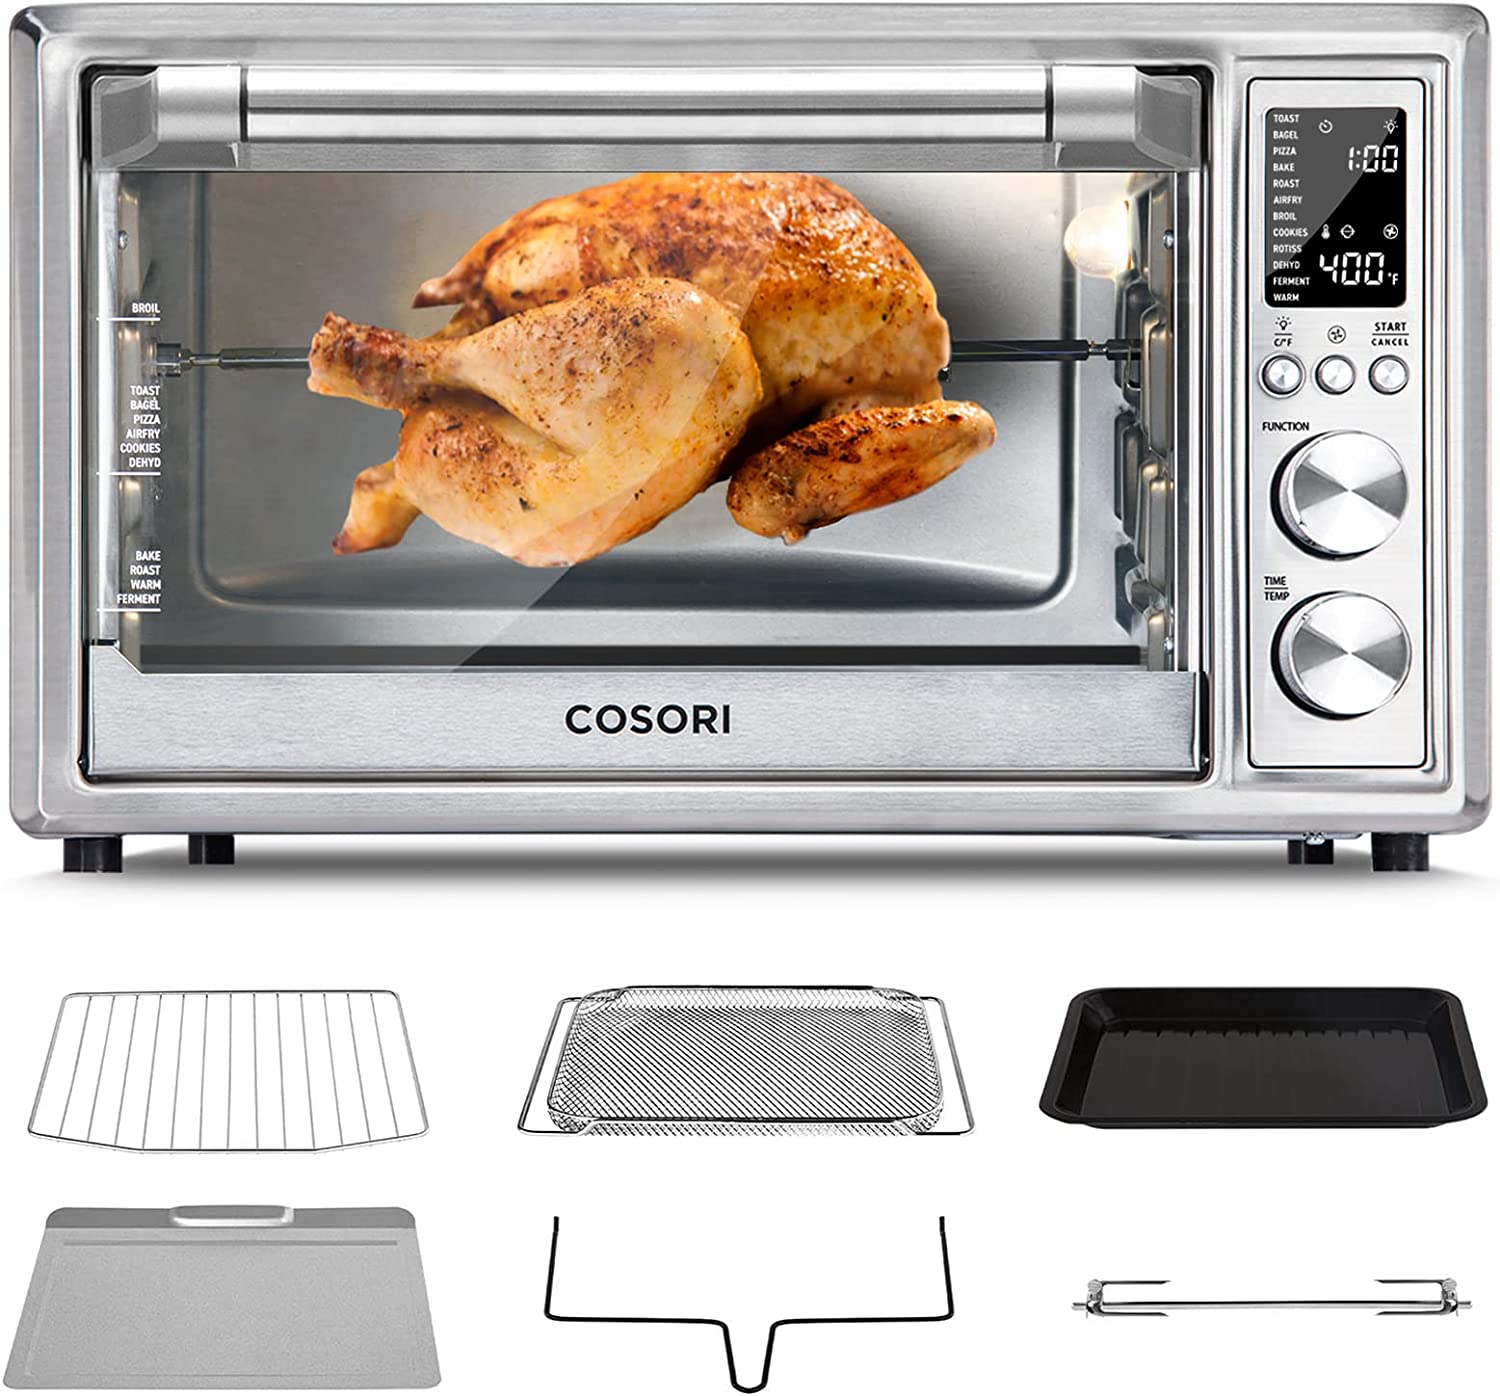 COSORI Air Fryer Toaster Oven, 12-in-1 Convection Oven Countertop with Rotisserie, Stainless Steel 32QT